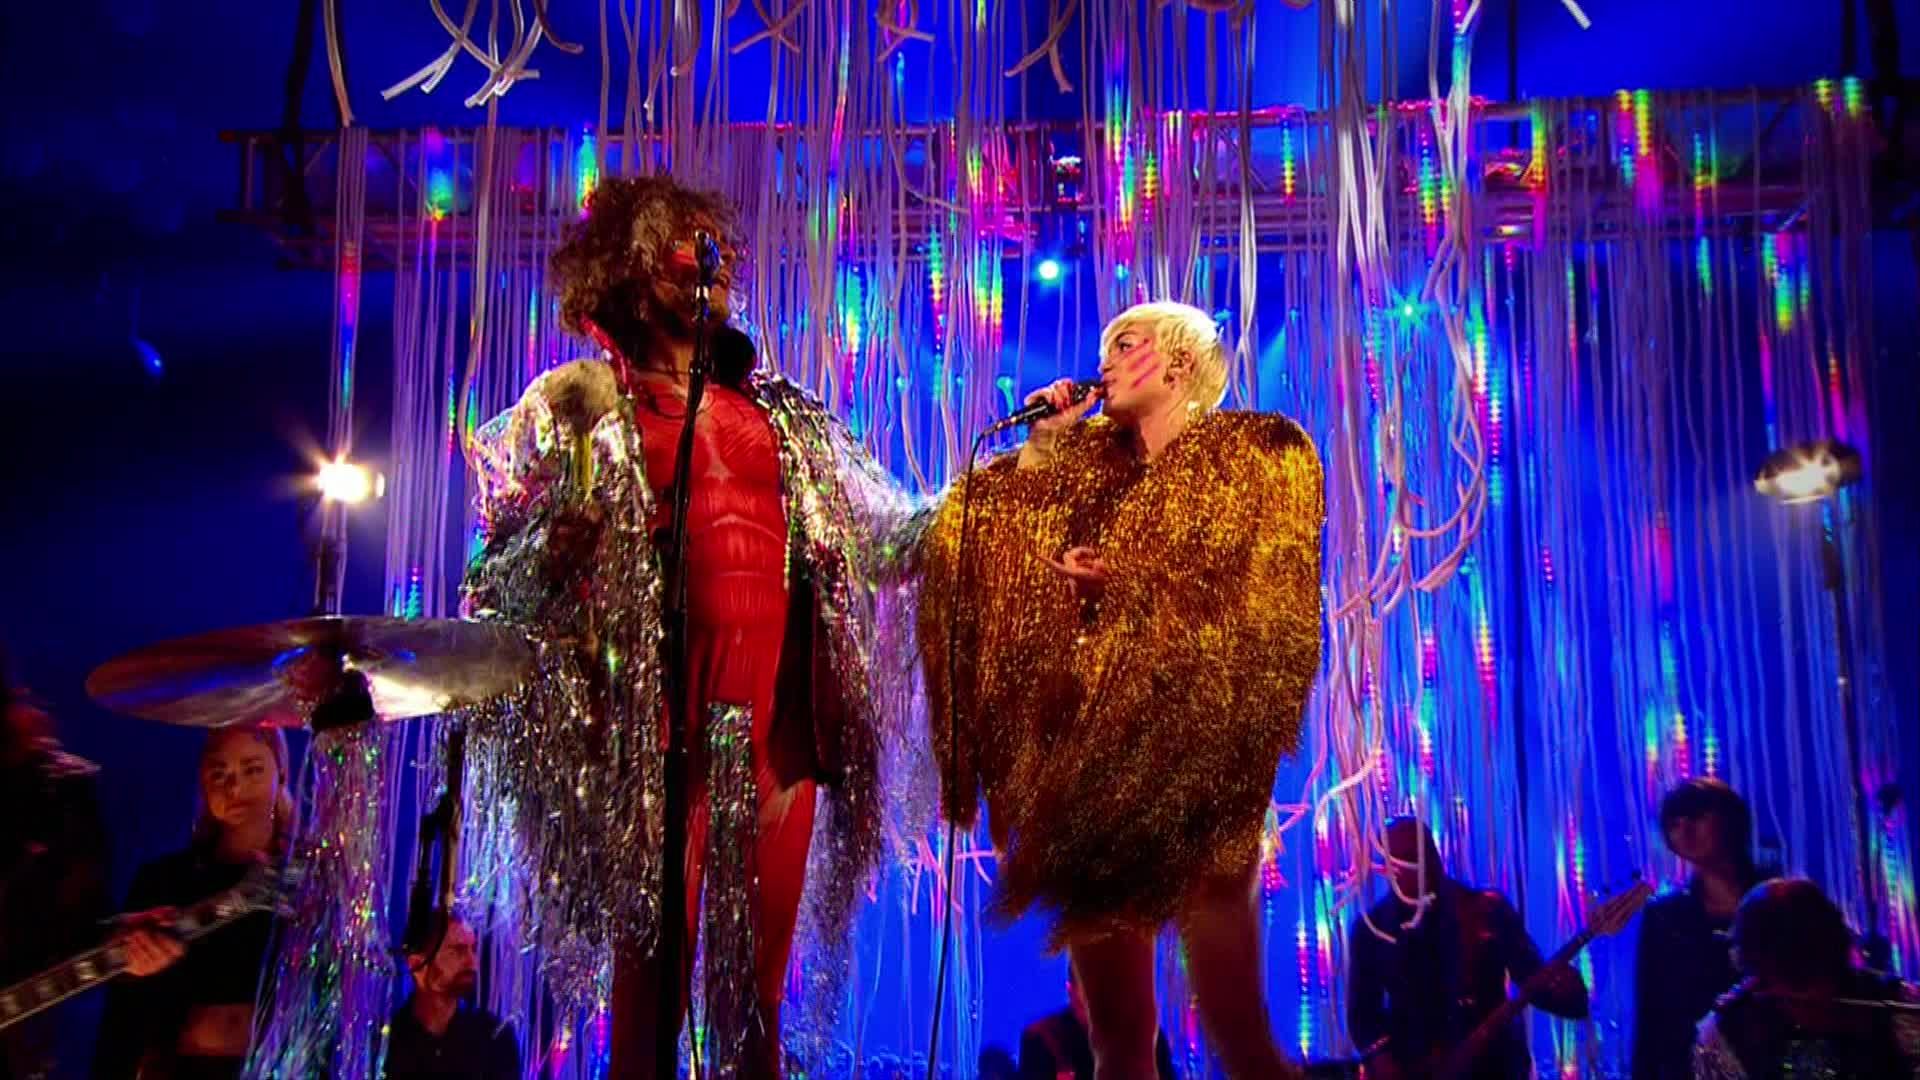 Miley Cyrus [ft The Flaming Lips] - 2014-05-18, Billboard Music Awards - 1080 TS - LSD preview 26